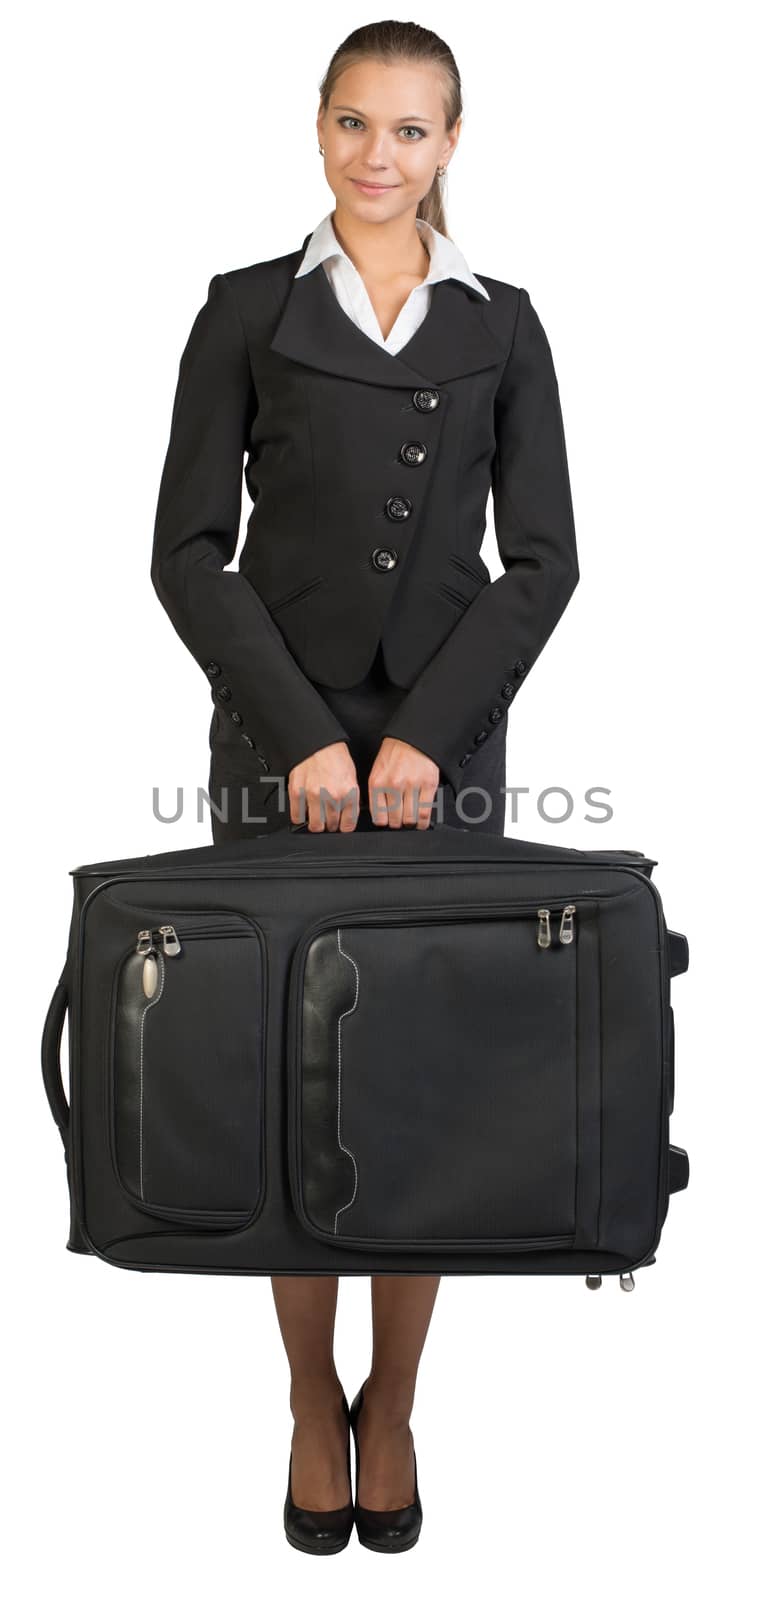 Businesswoman holding suitcase, looking at camera, smiling by cherezoff